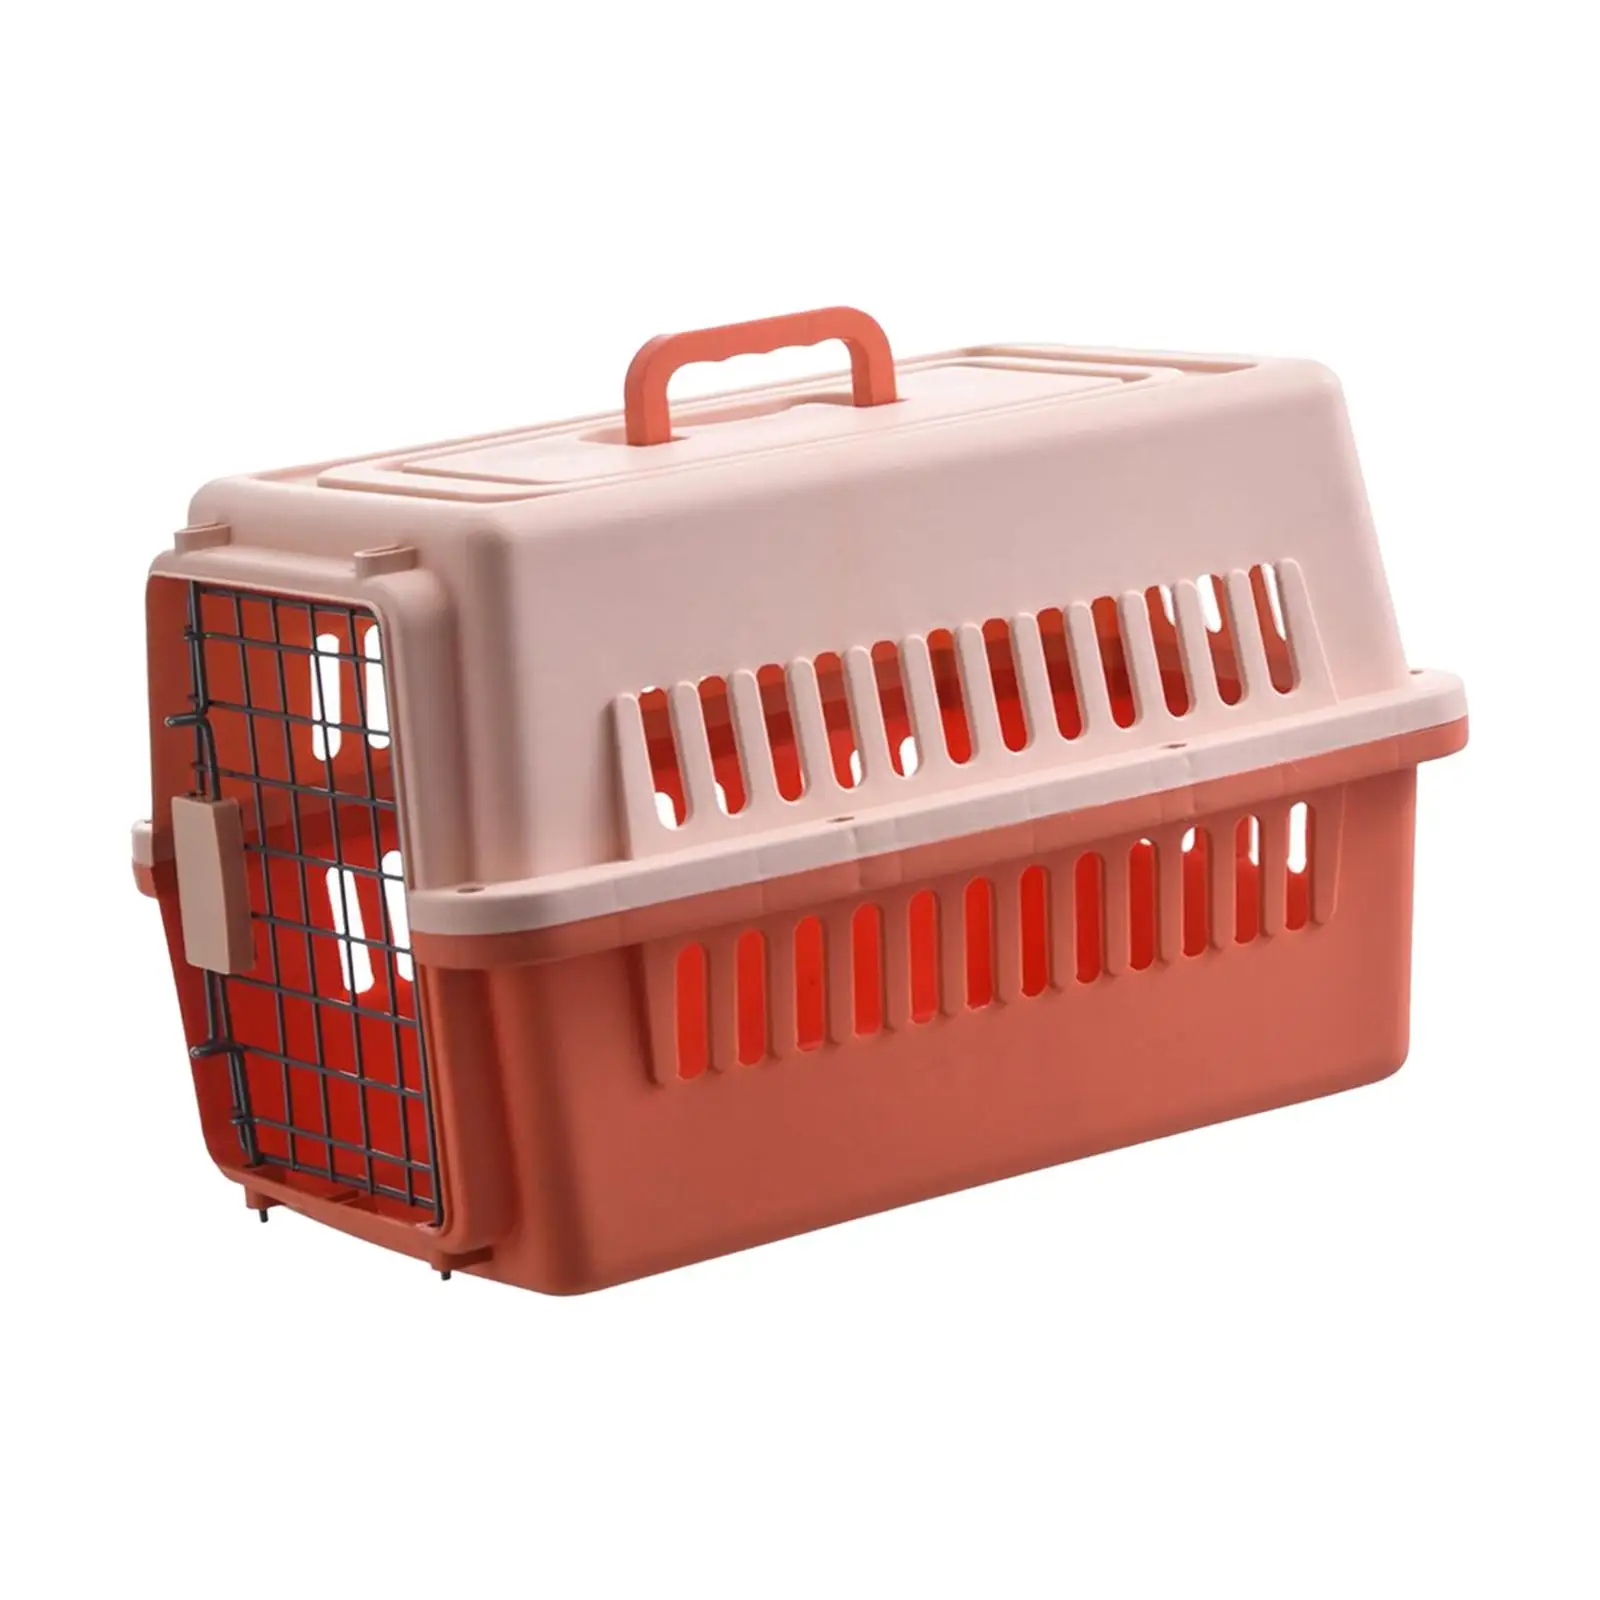 Dog Travel Kennel Cage Transport Box, Hard Sided Pet Carrier for Cats, Kitten